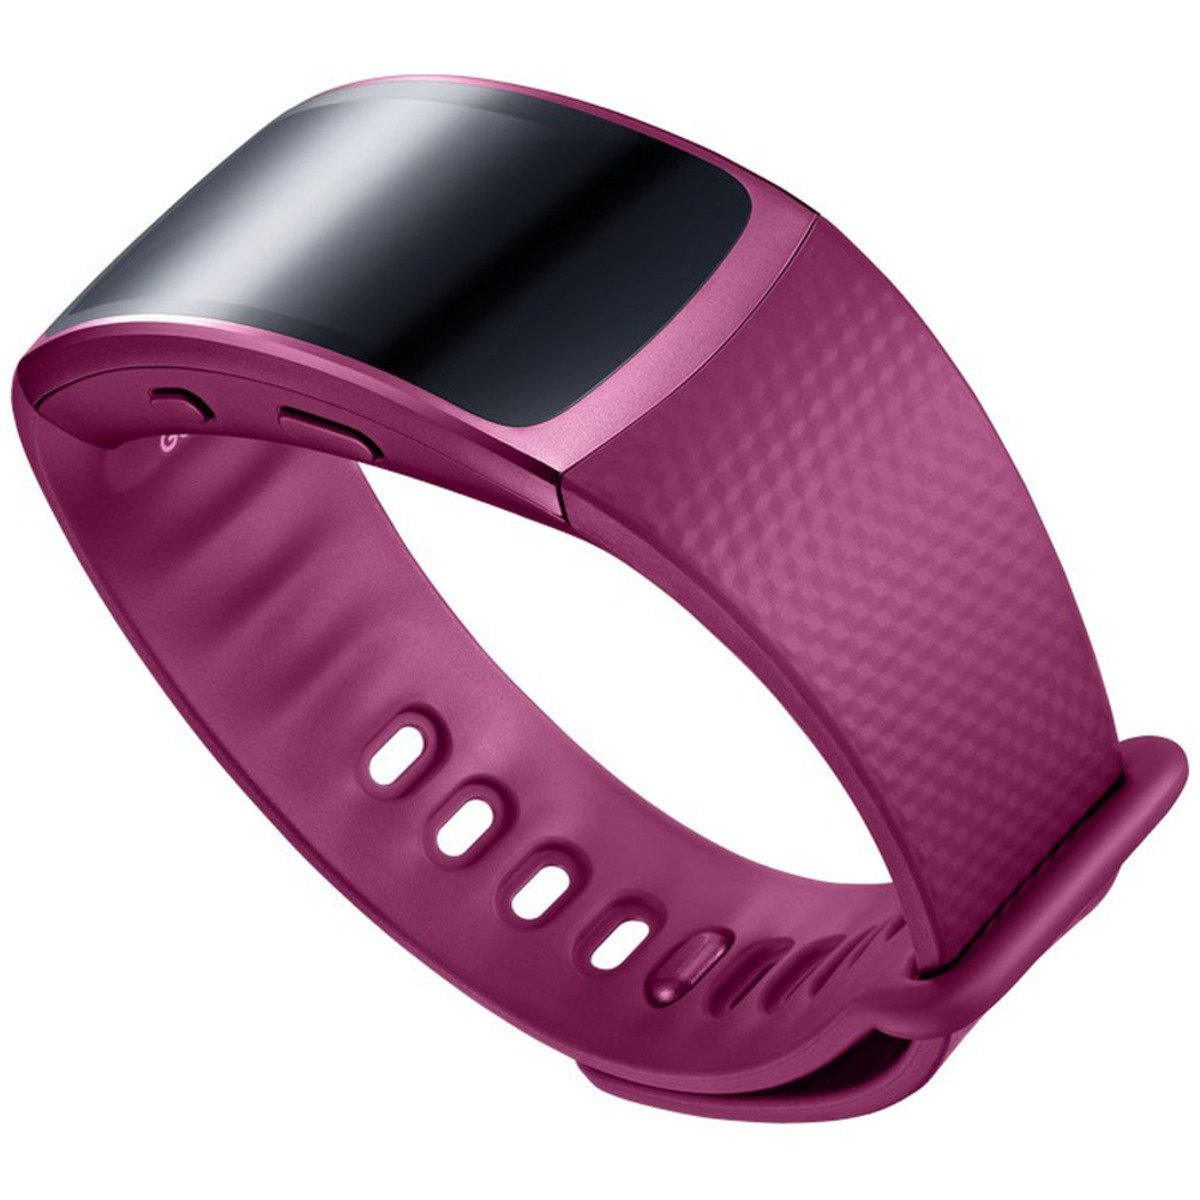 Samsung Gear Fit2 GPS Sports Band R3600 Small Pink